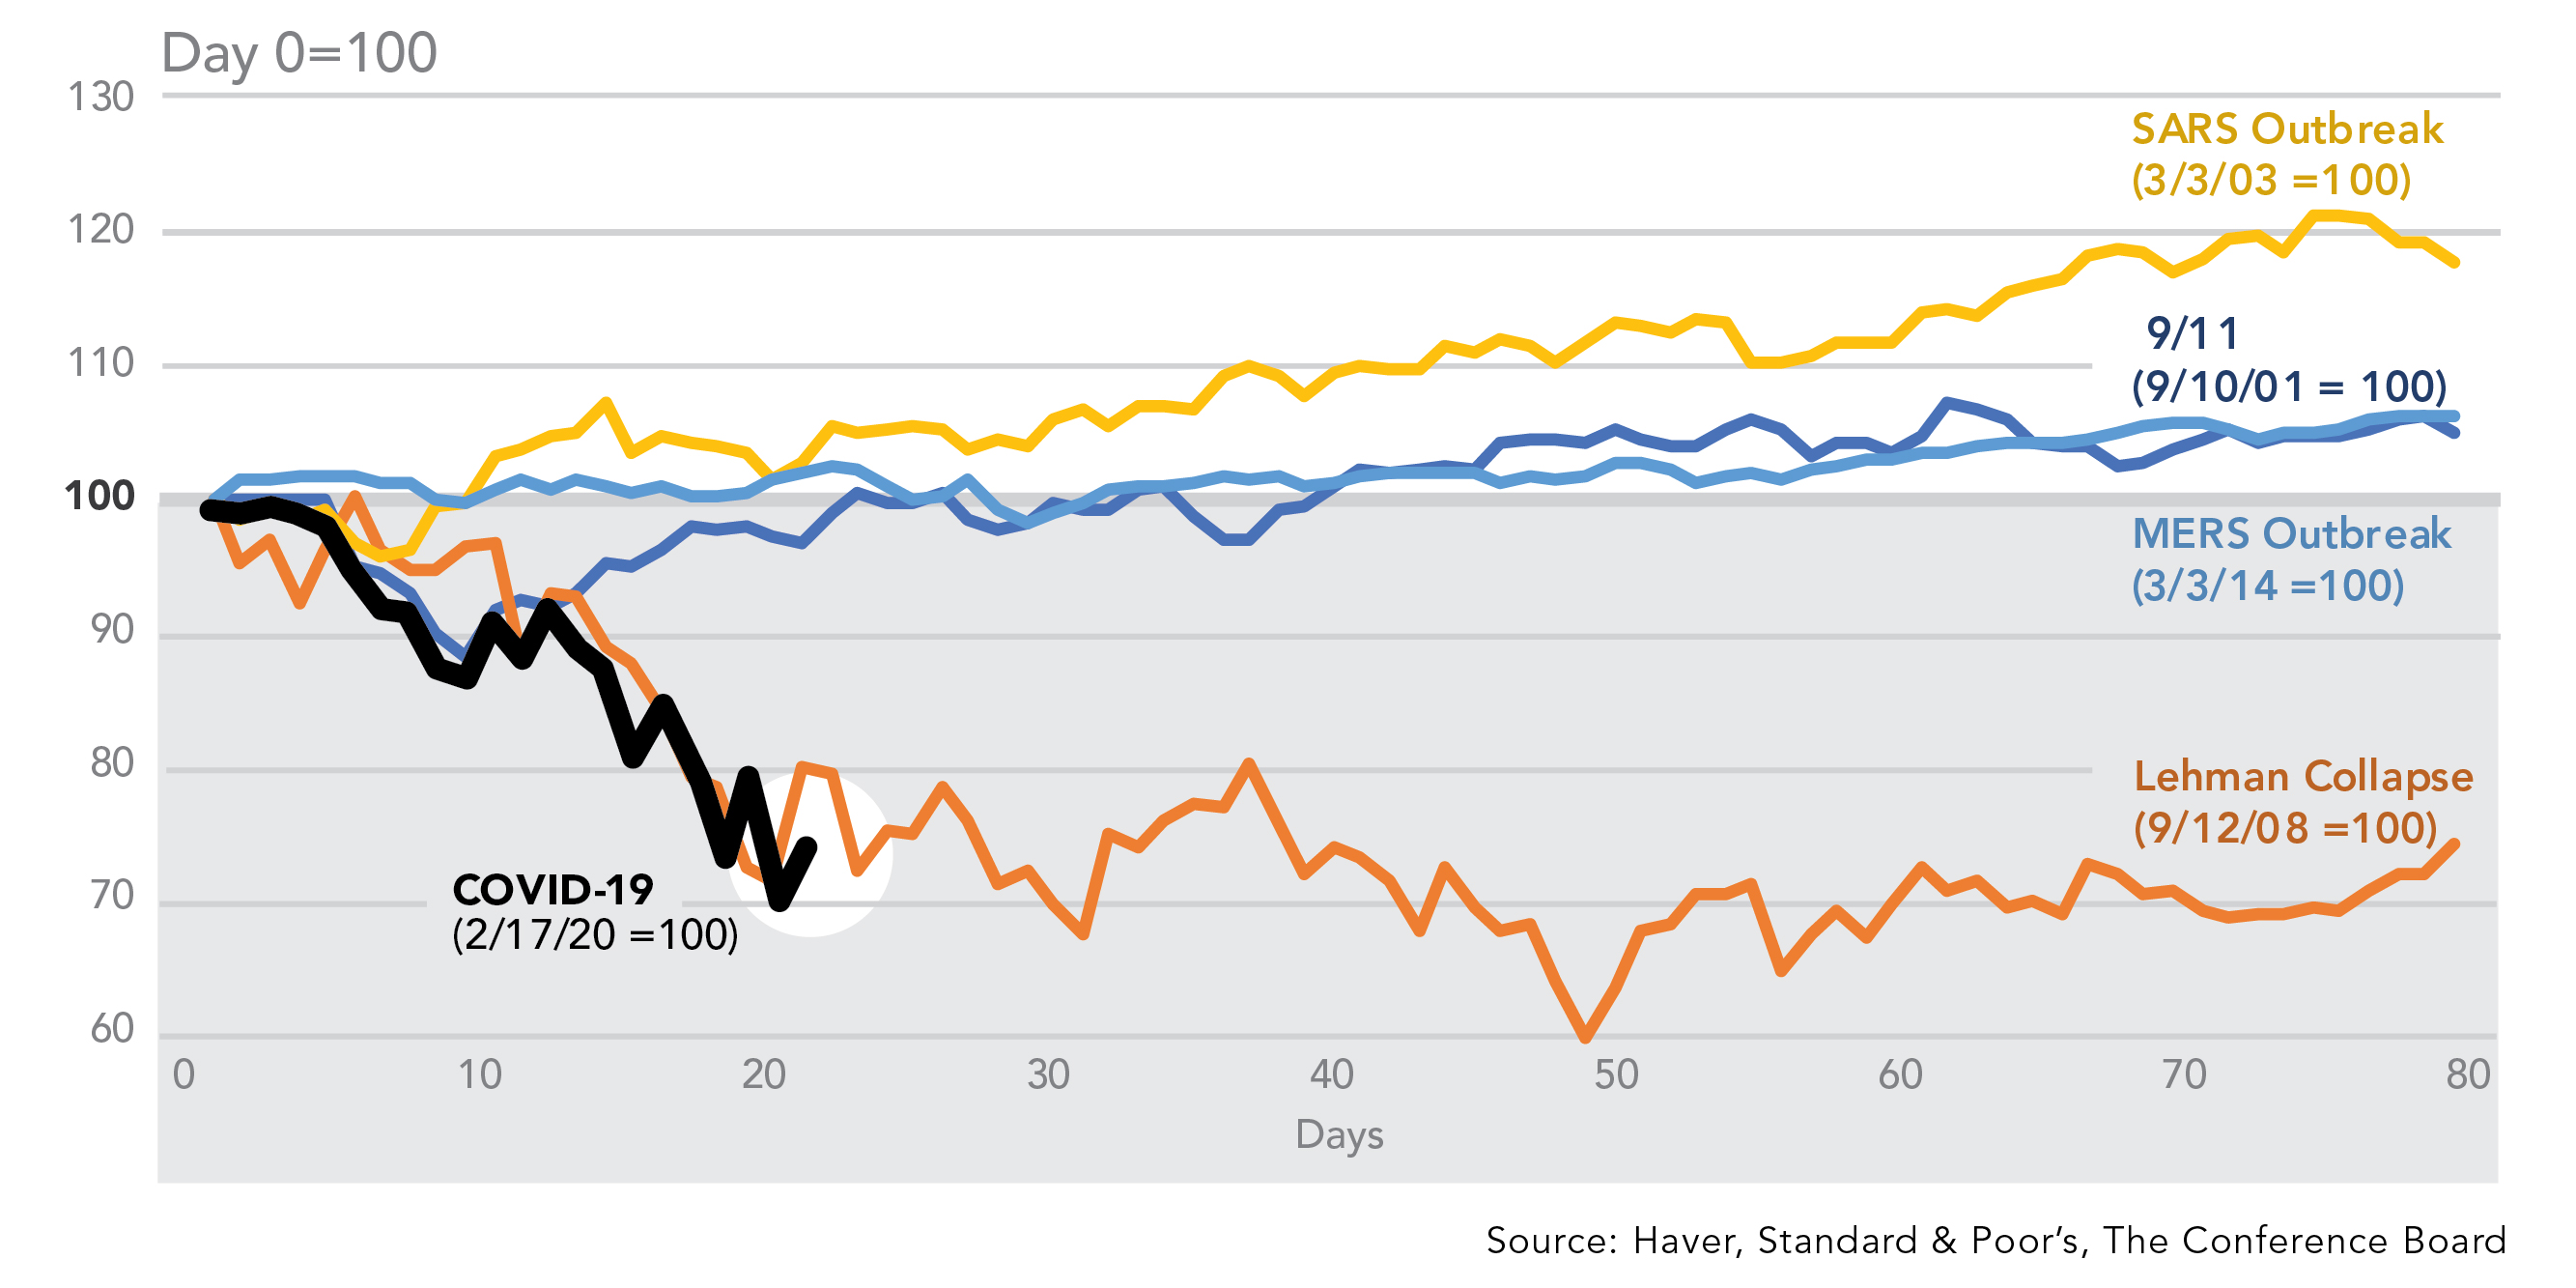 The first 80 days: Comparing COVID-19's impact on US equities with other shocks